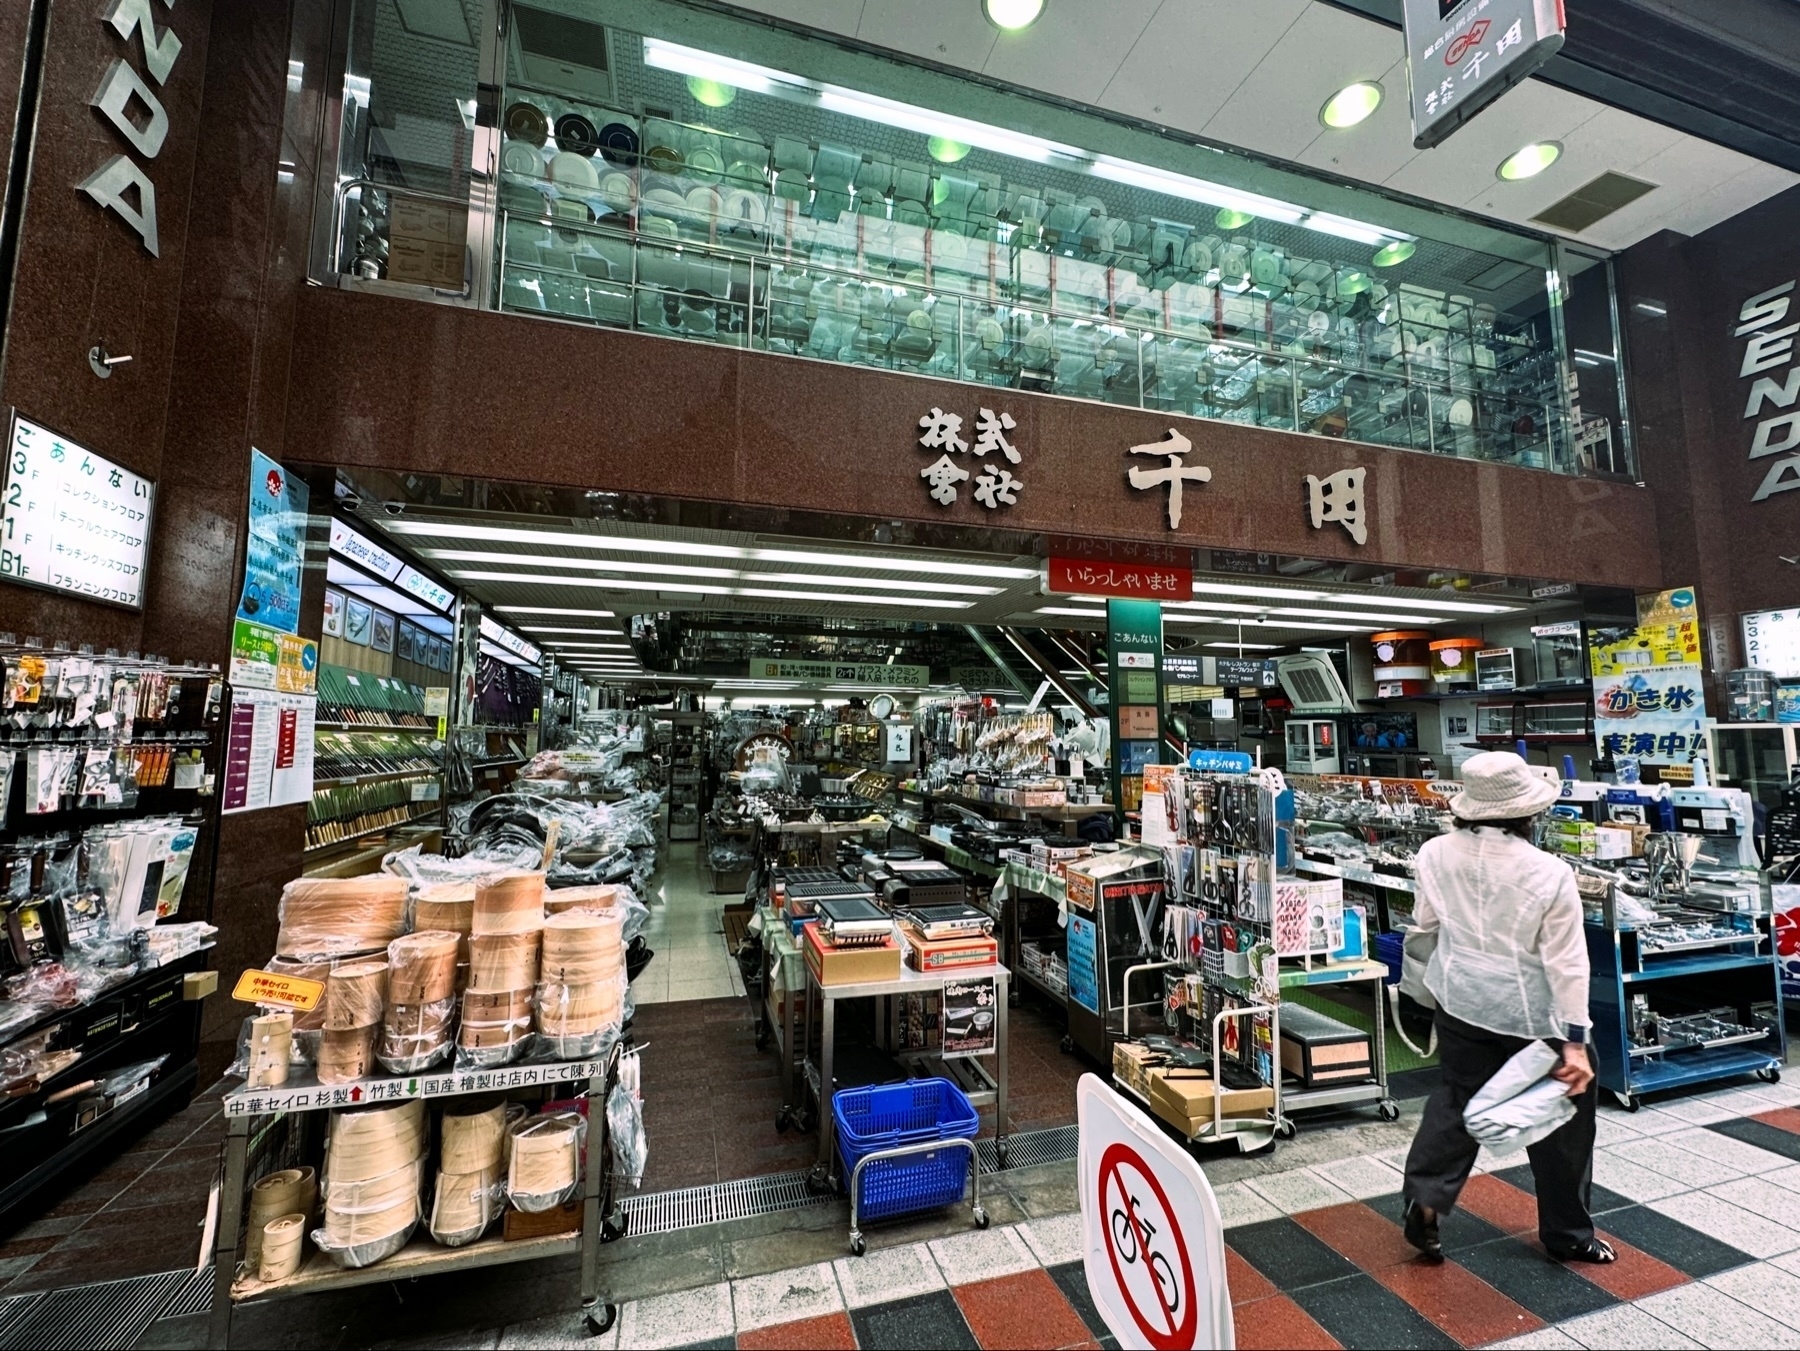 A person walking past the entrance of an electronics store, which displays a variety of products ranging from kitchenware to electronic equipment. Visible signage includes Japanese text.